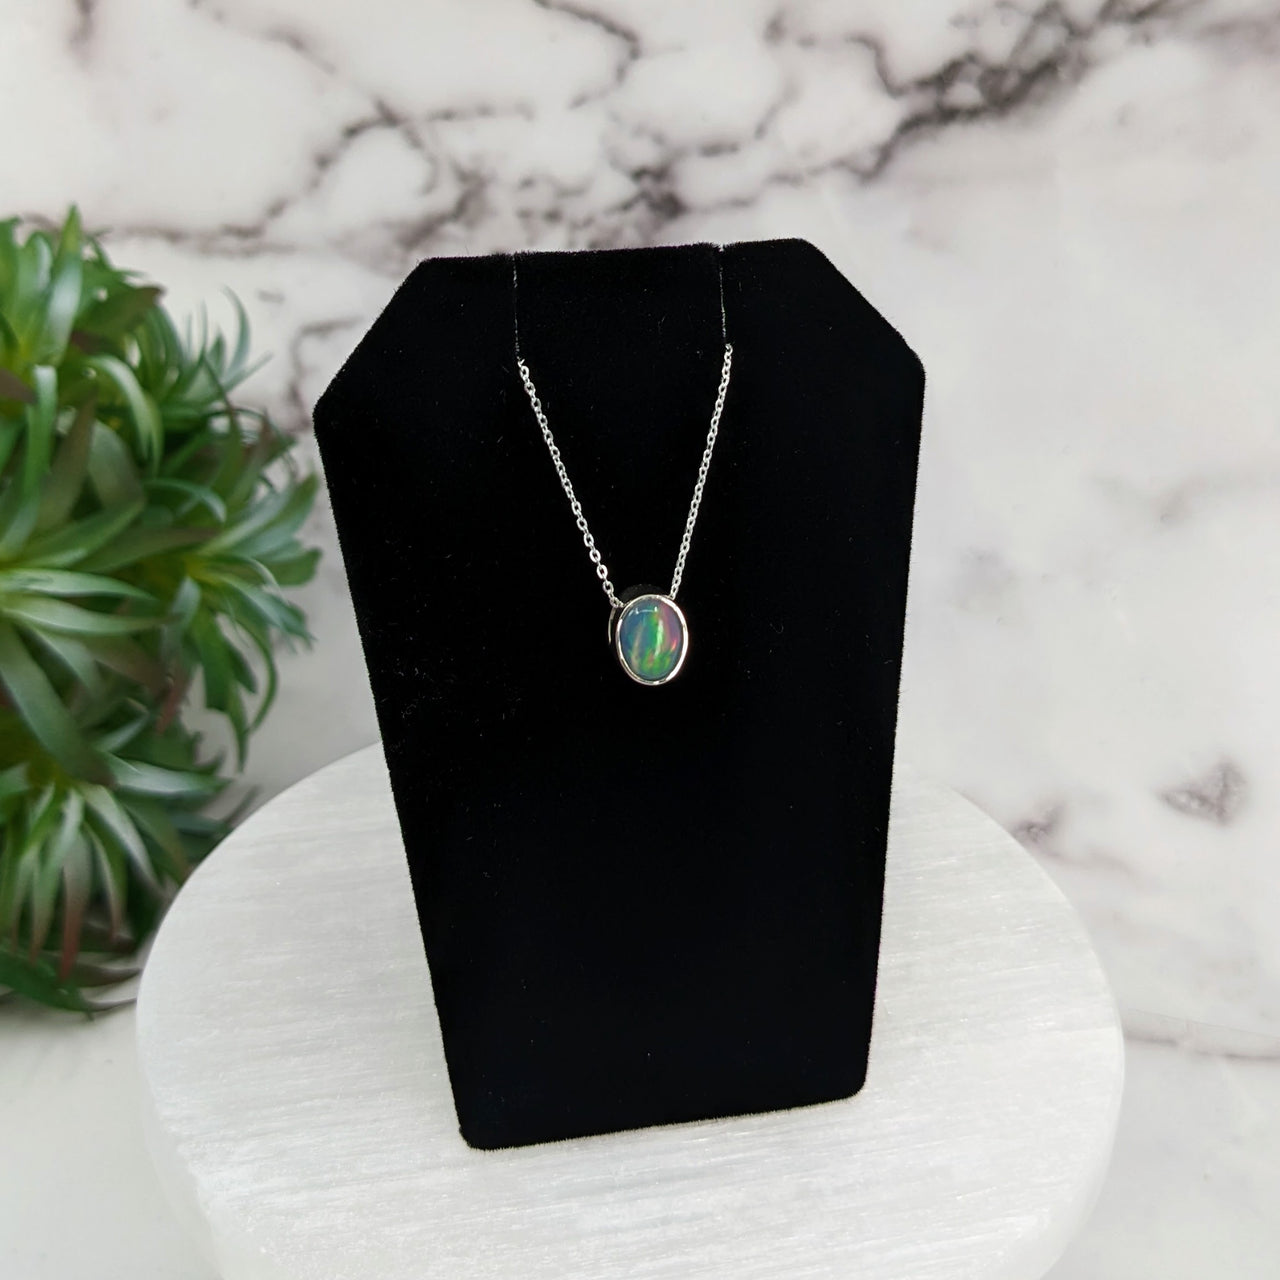 Ethiopian Opal Polished Oval Necklace Sterling Silver Slider Pendant on 18" Chain #LV3251